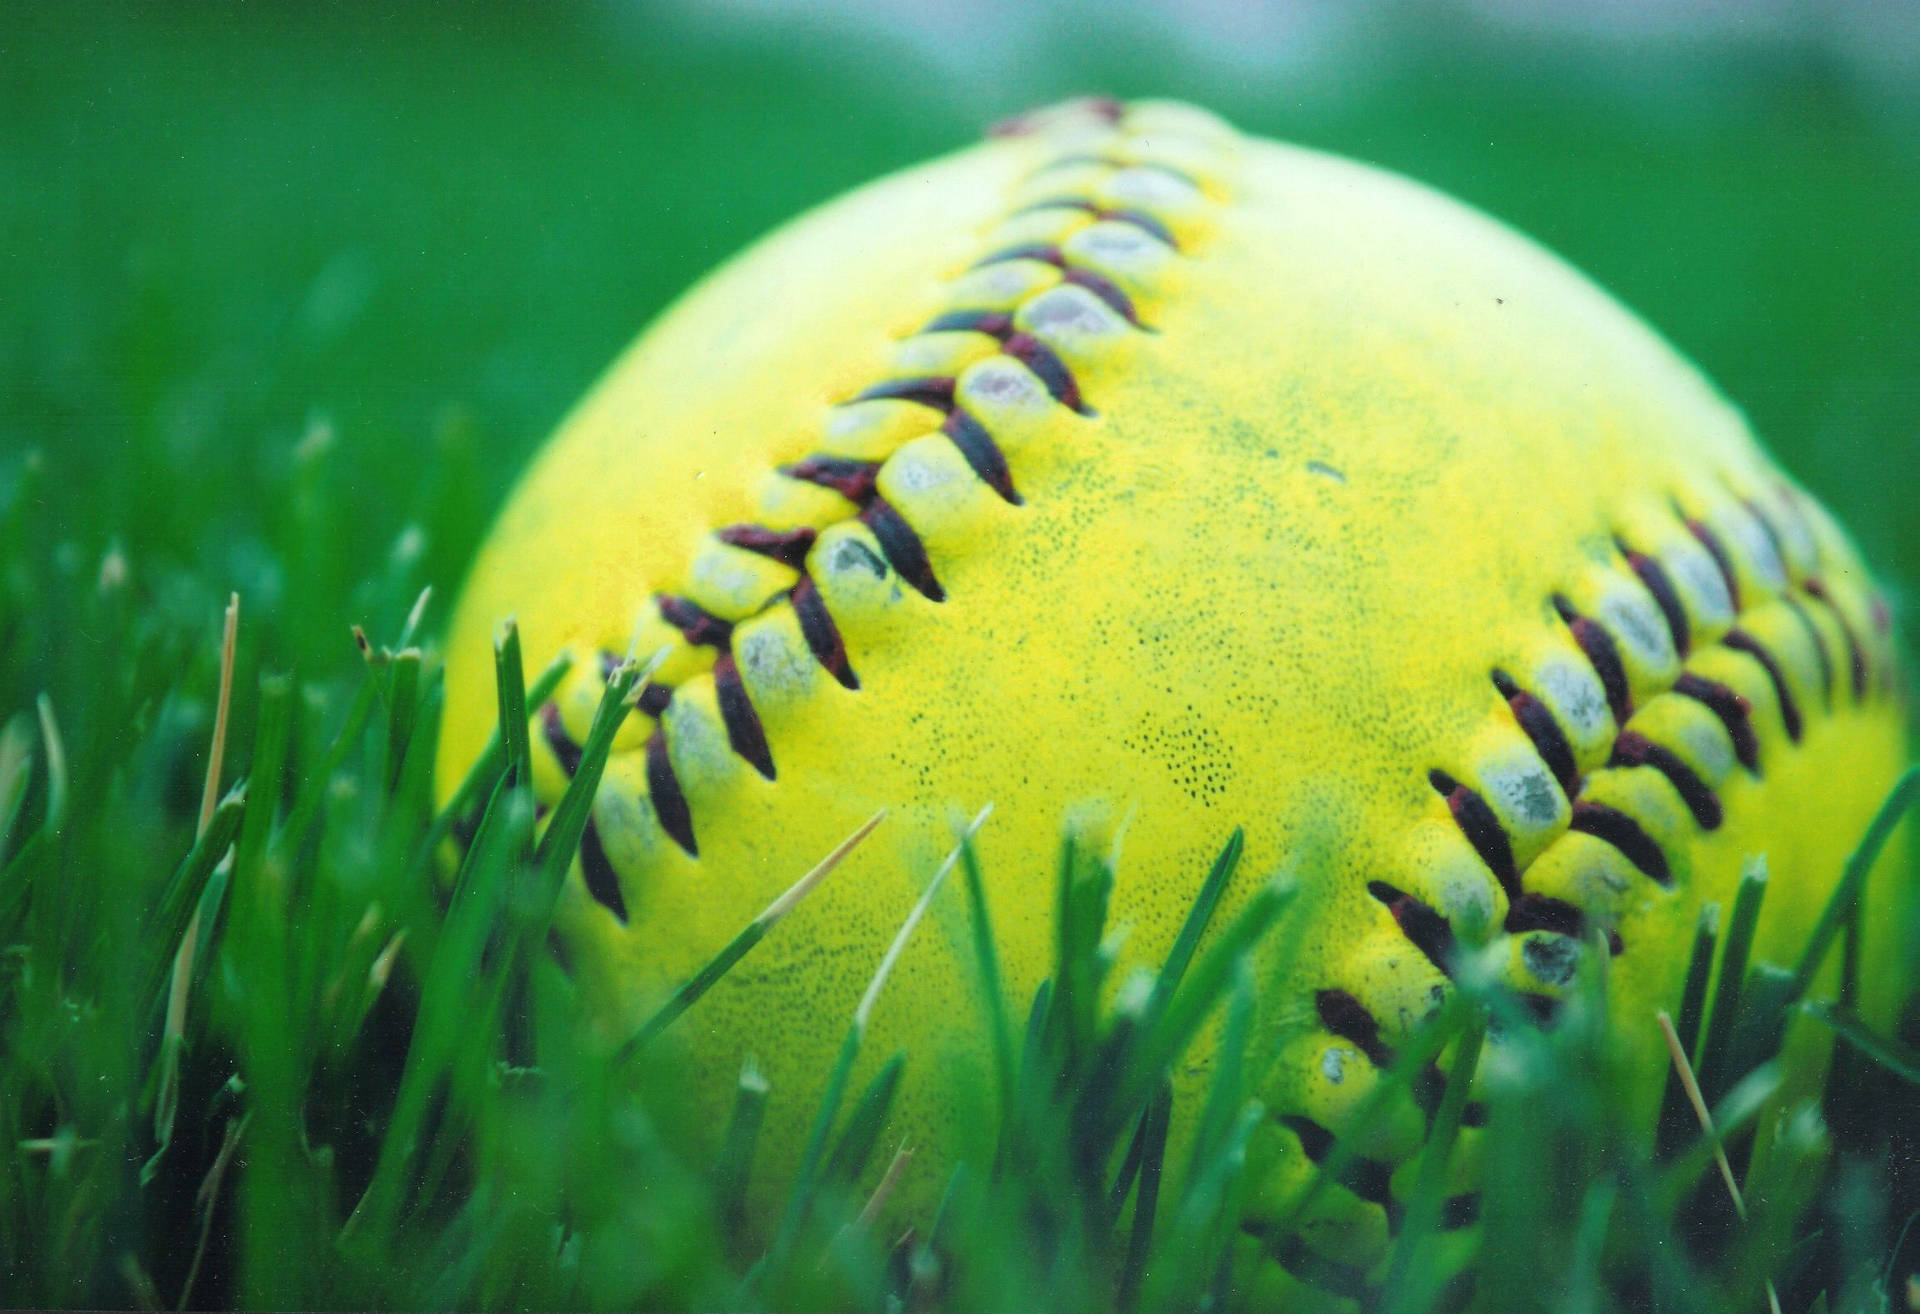 Softball Detailed Photograph With Stitching Wallpaper